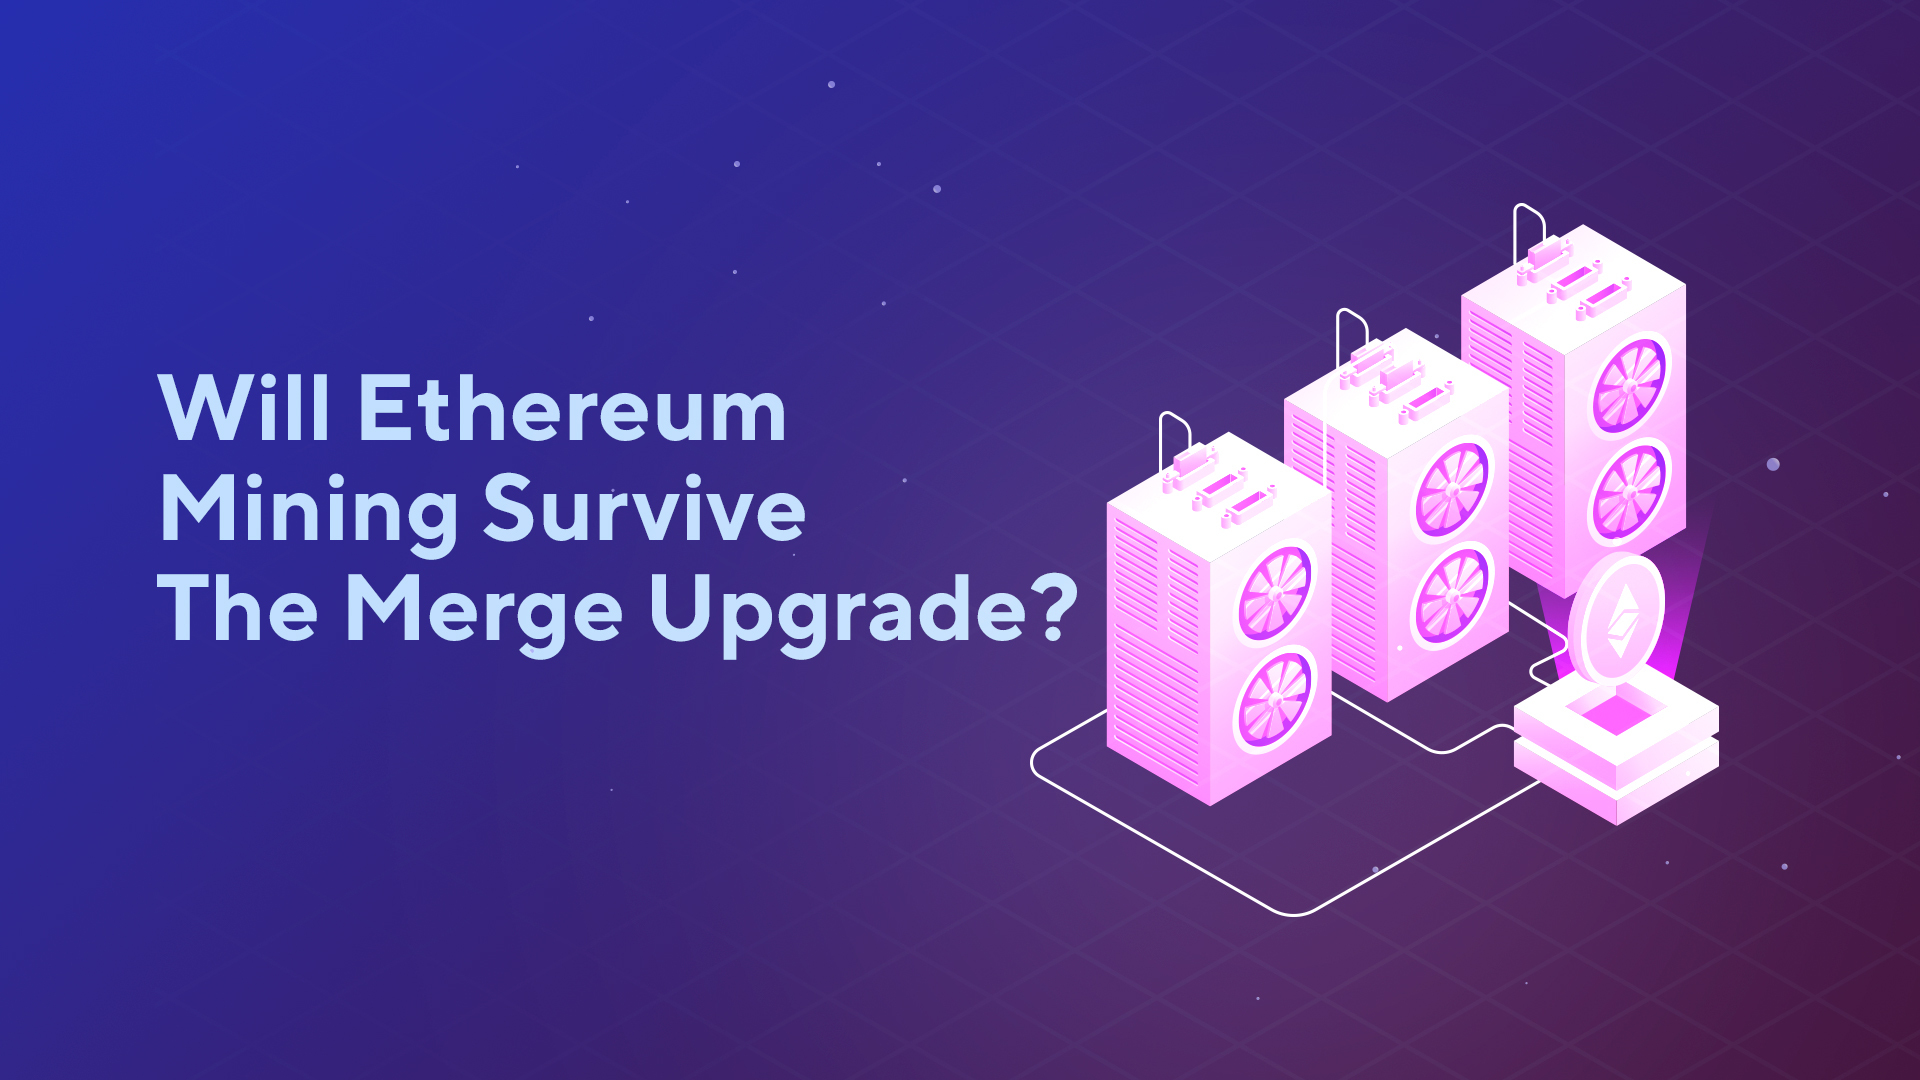 Will Ethereum Mining Survive The Merge Upgrade?